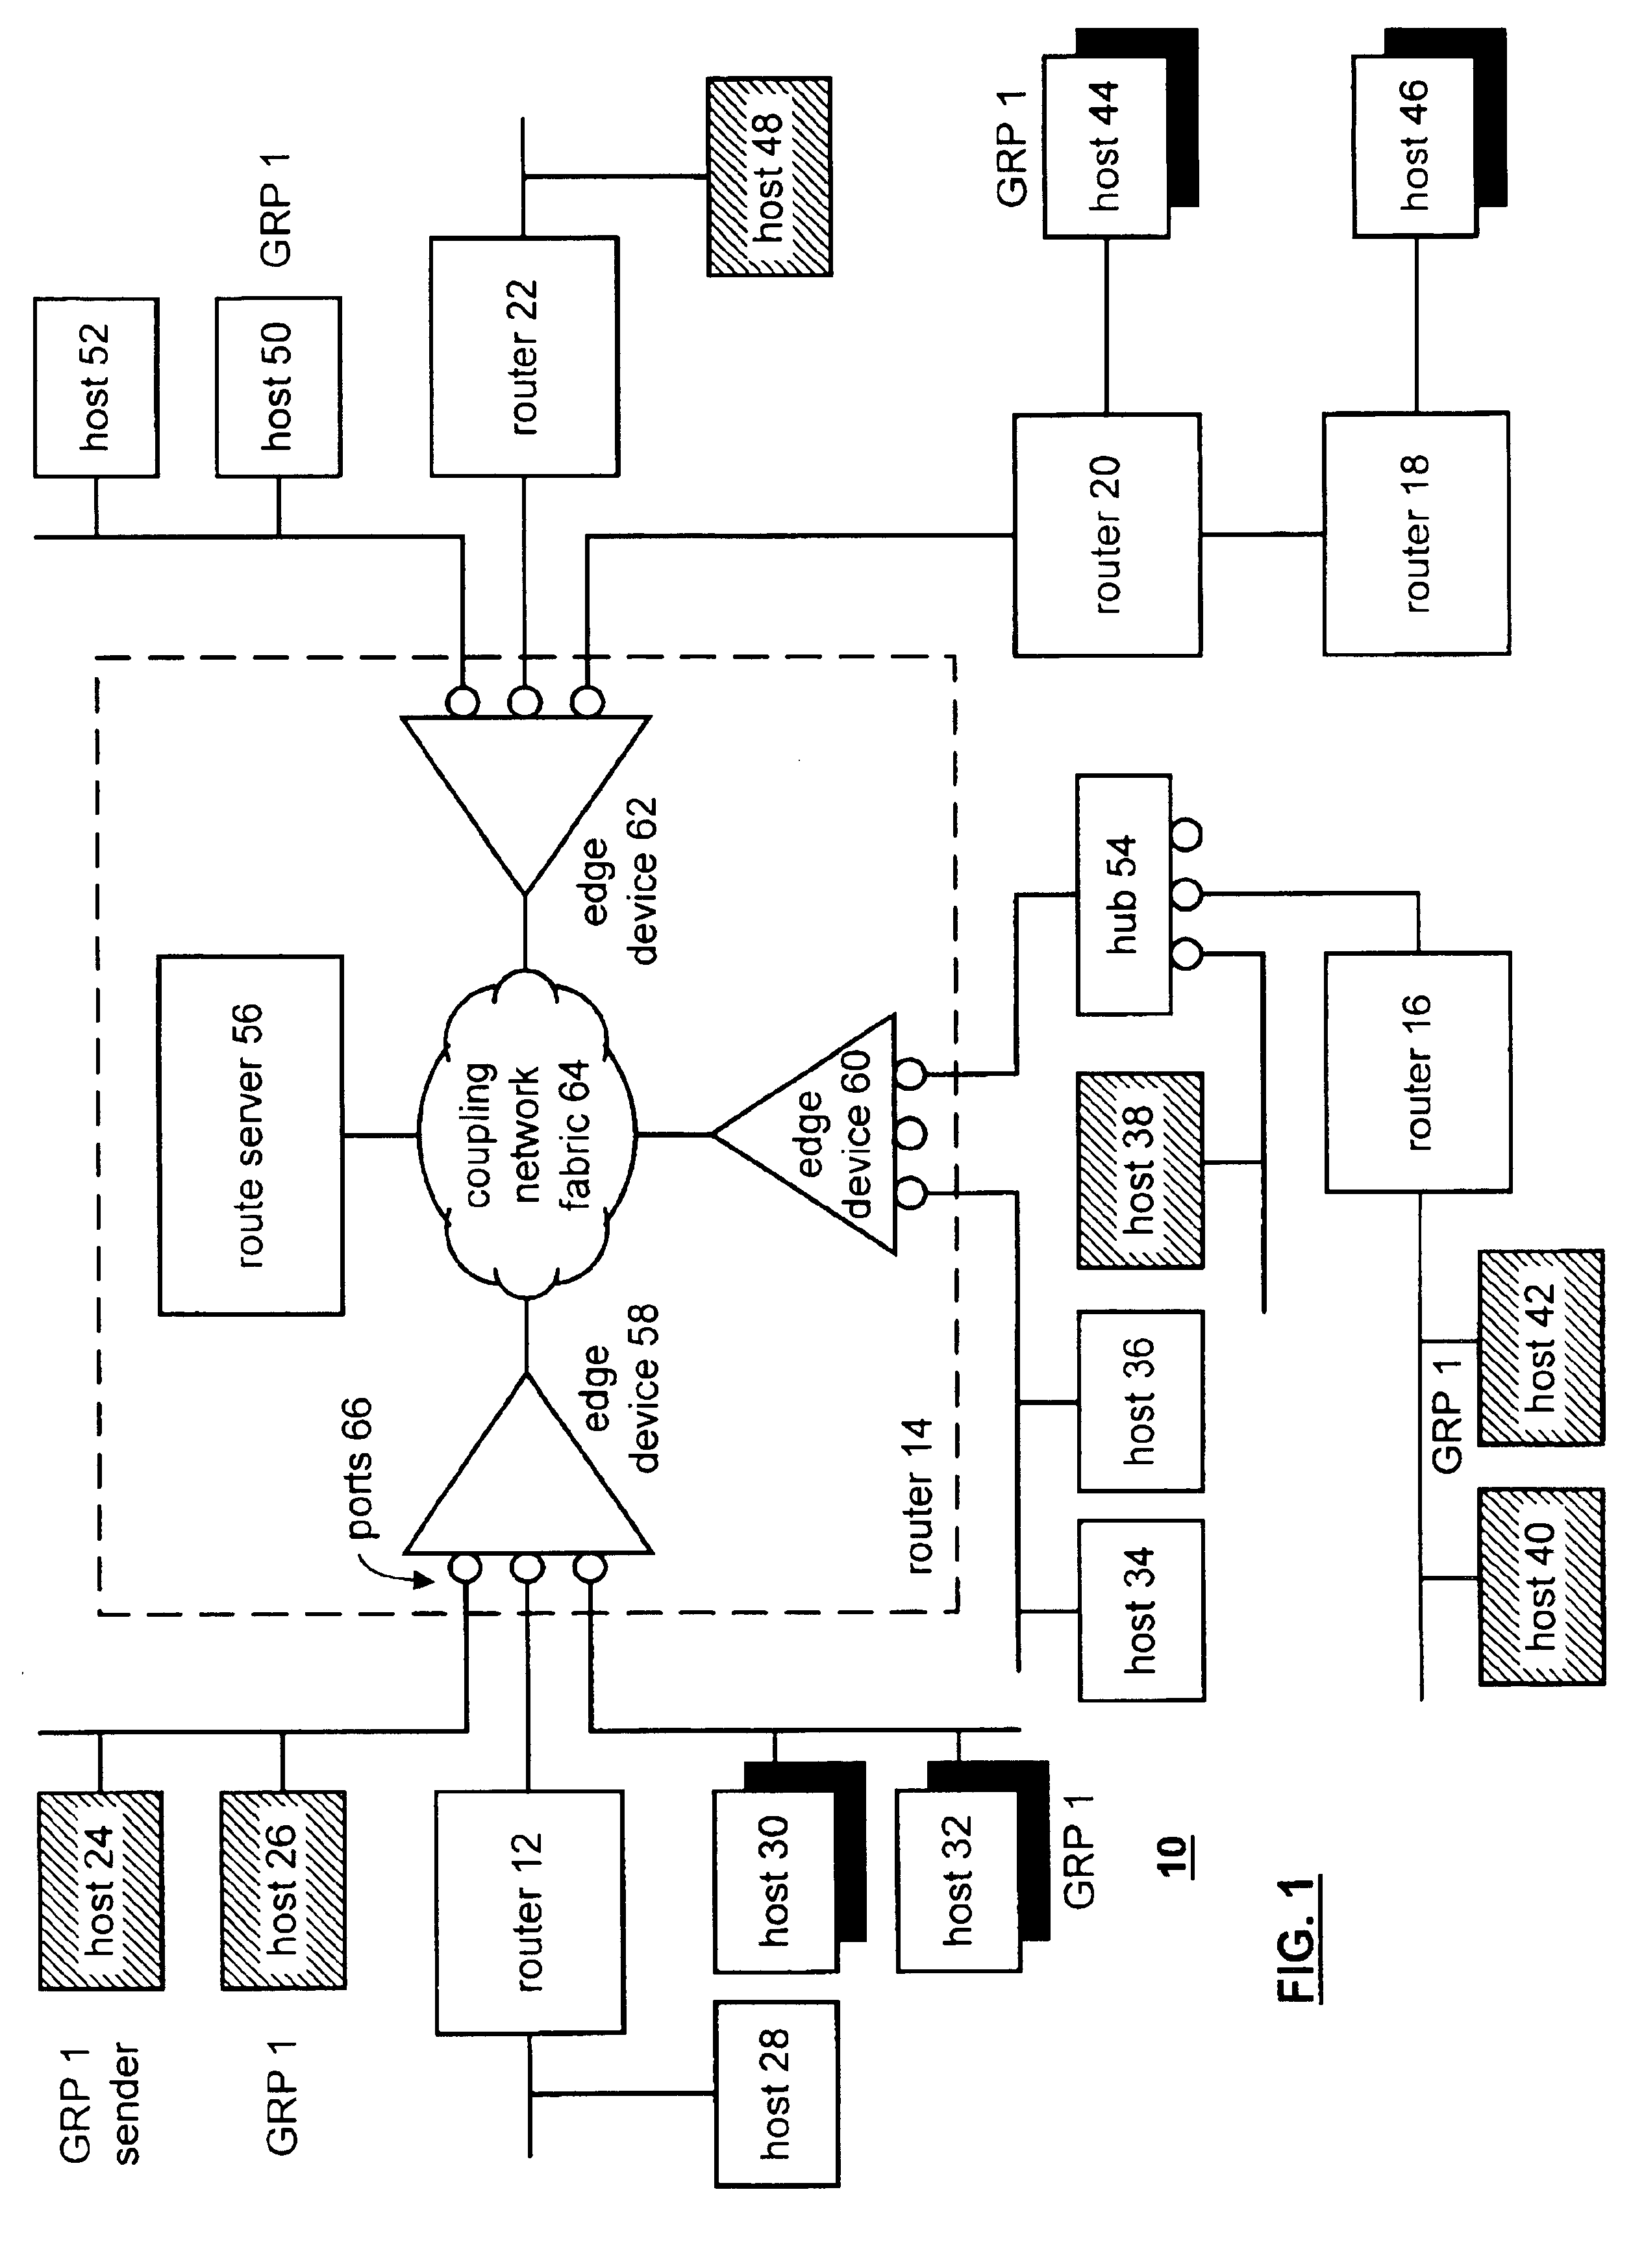 Method and apparatus for providing multi-cast transmissions using a distributed router